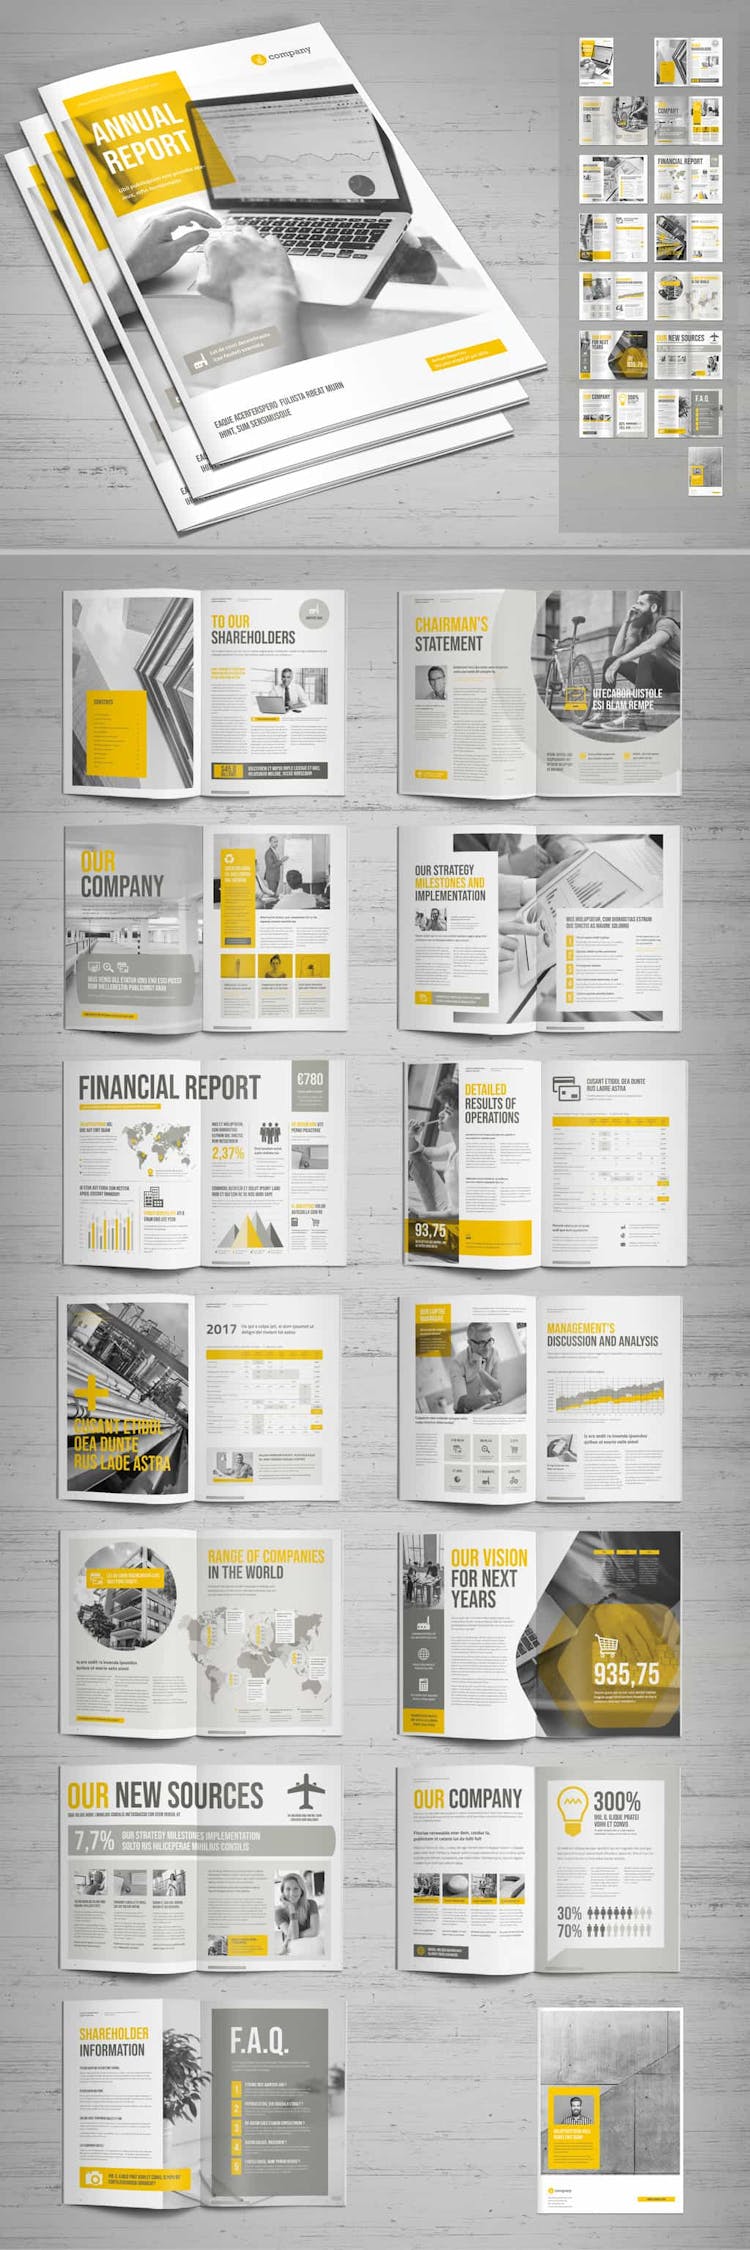 20 Modern Annual Report Design Templates (Free and Paid) – Redokun With Chairman